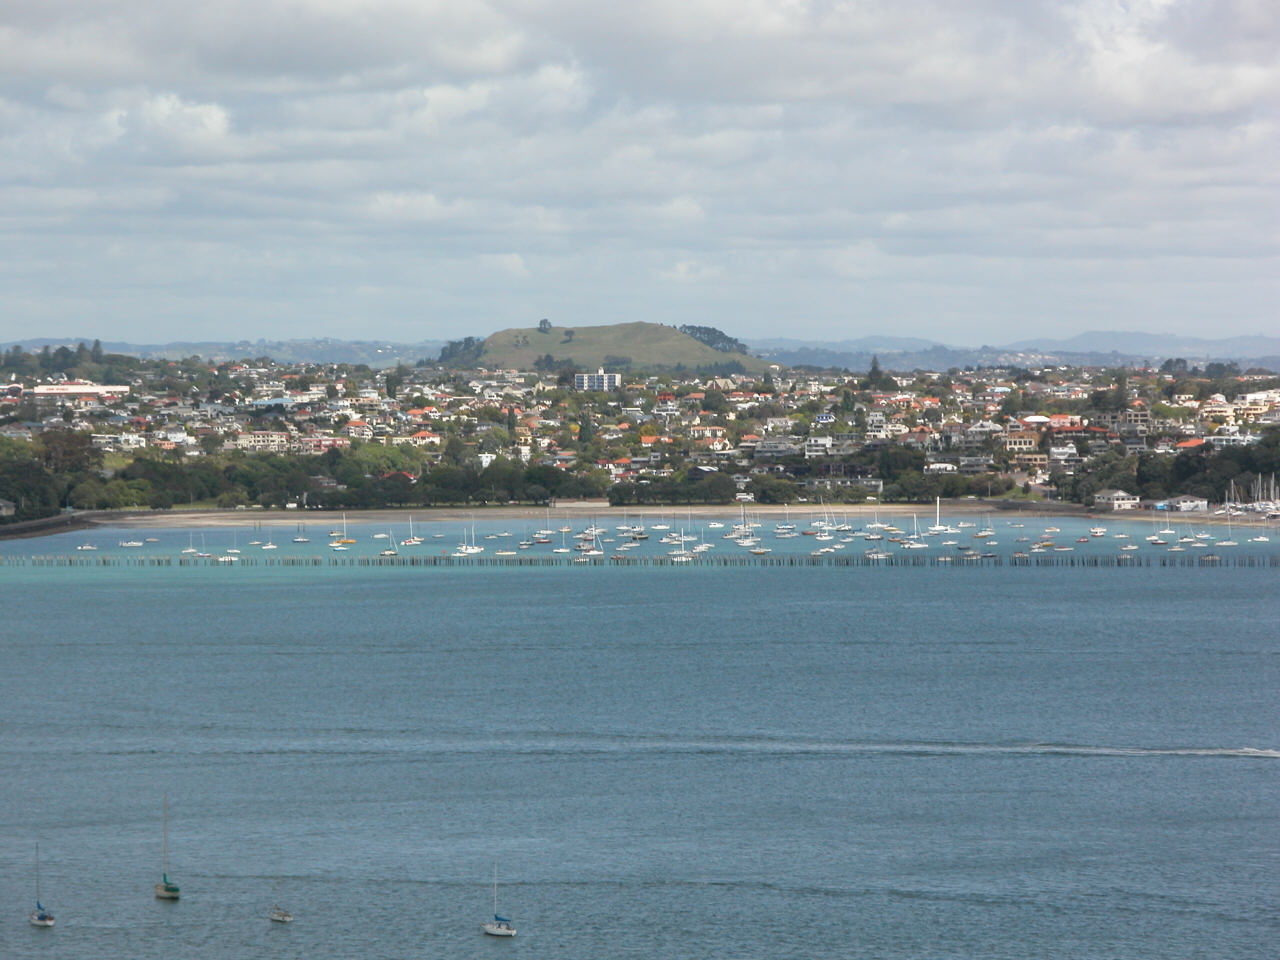 View of One Tree Hill w/ Royal Akarana Yacht Club in front